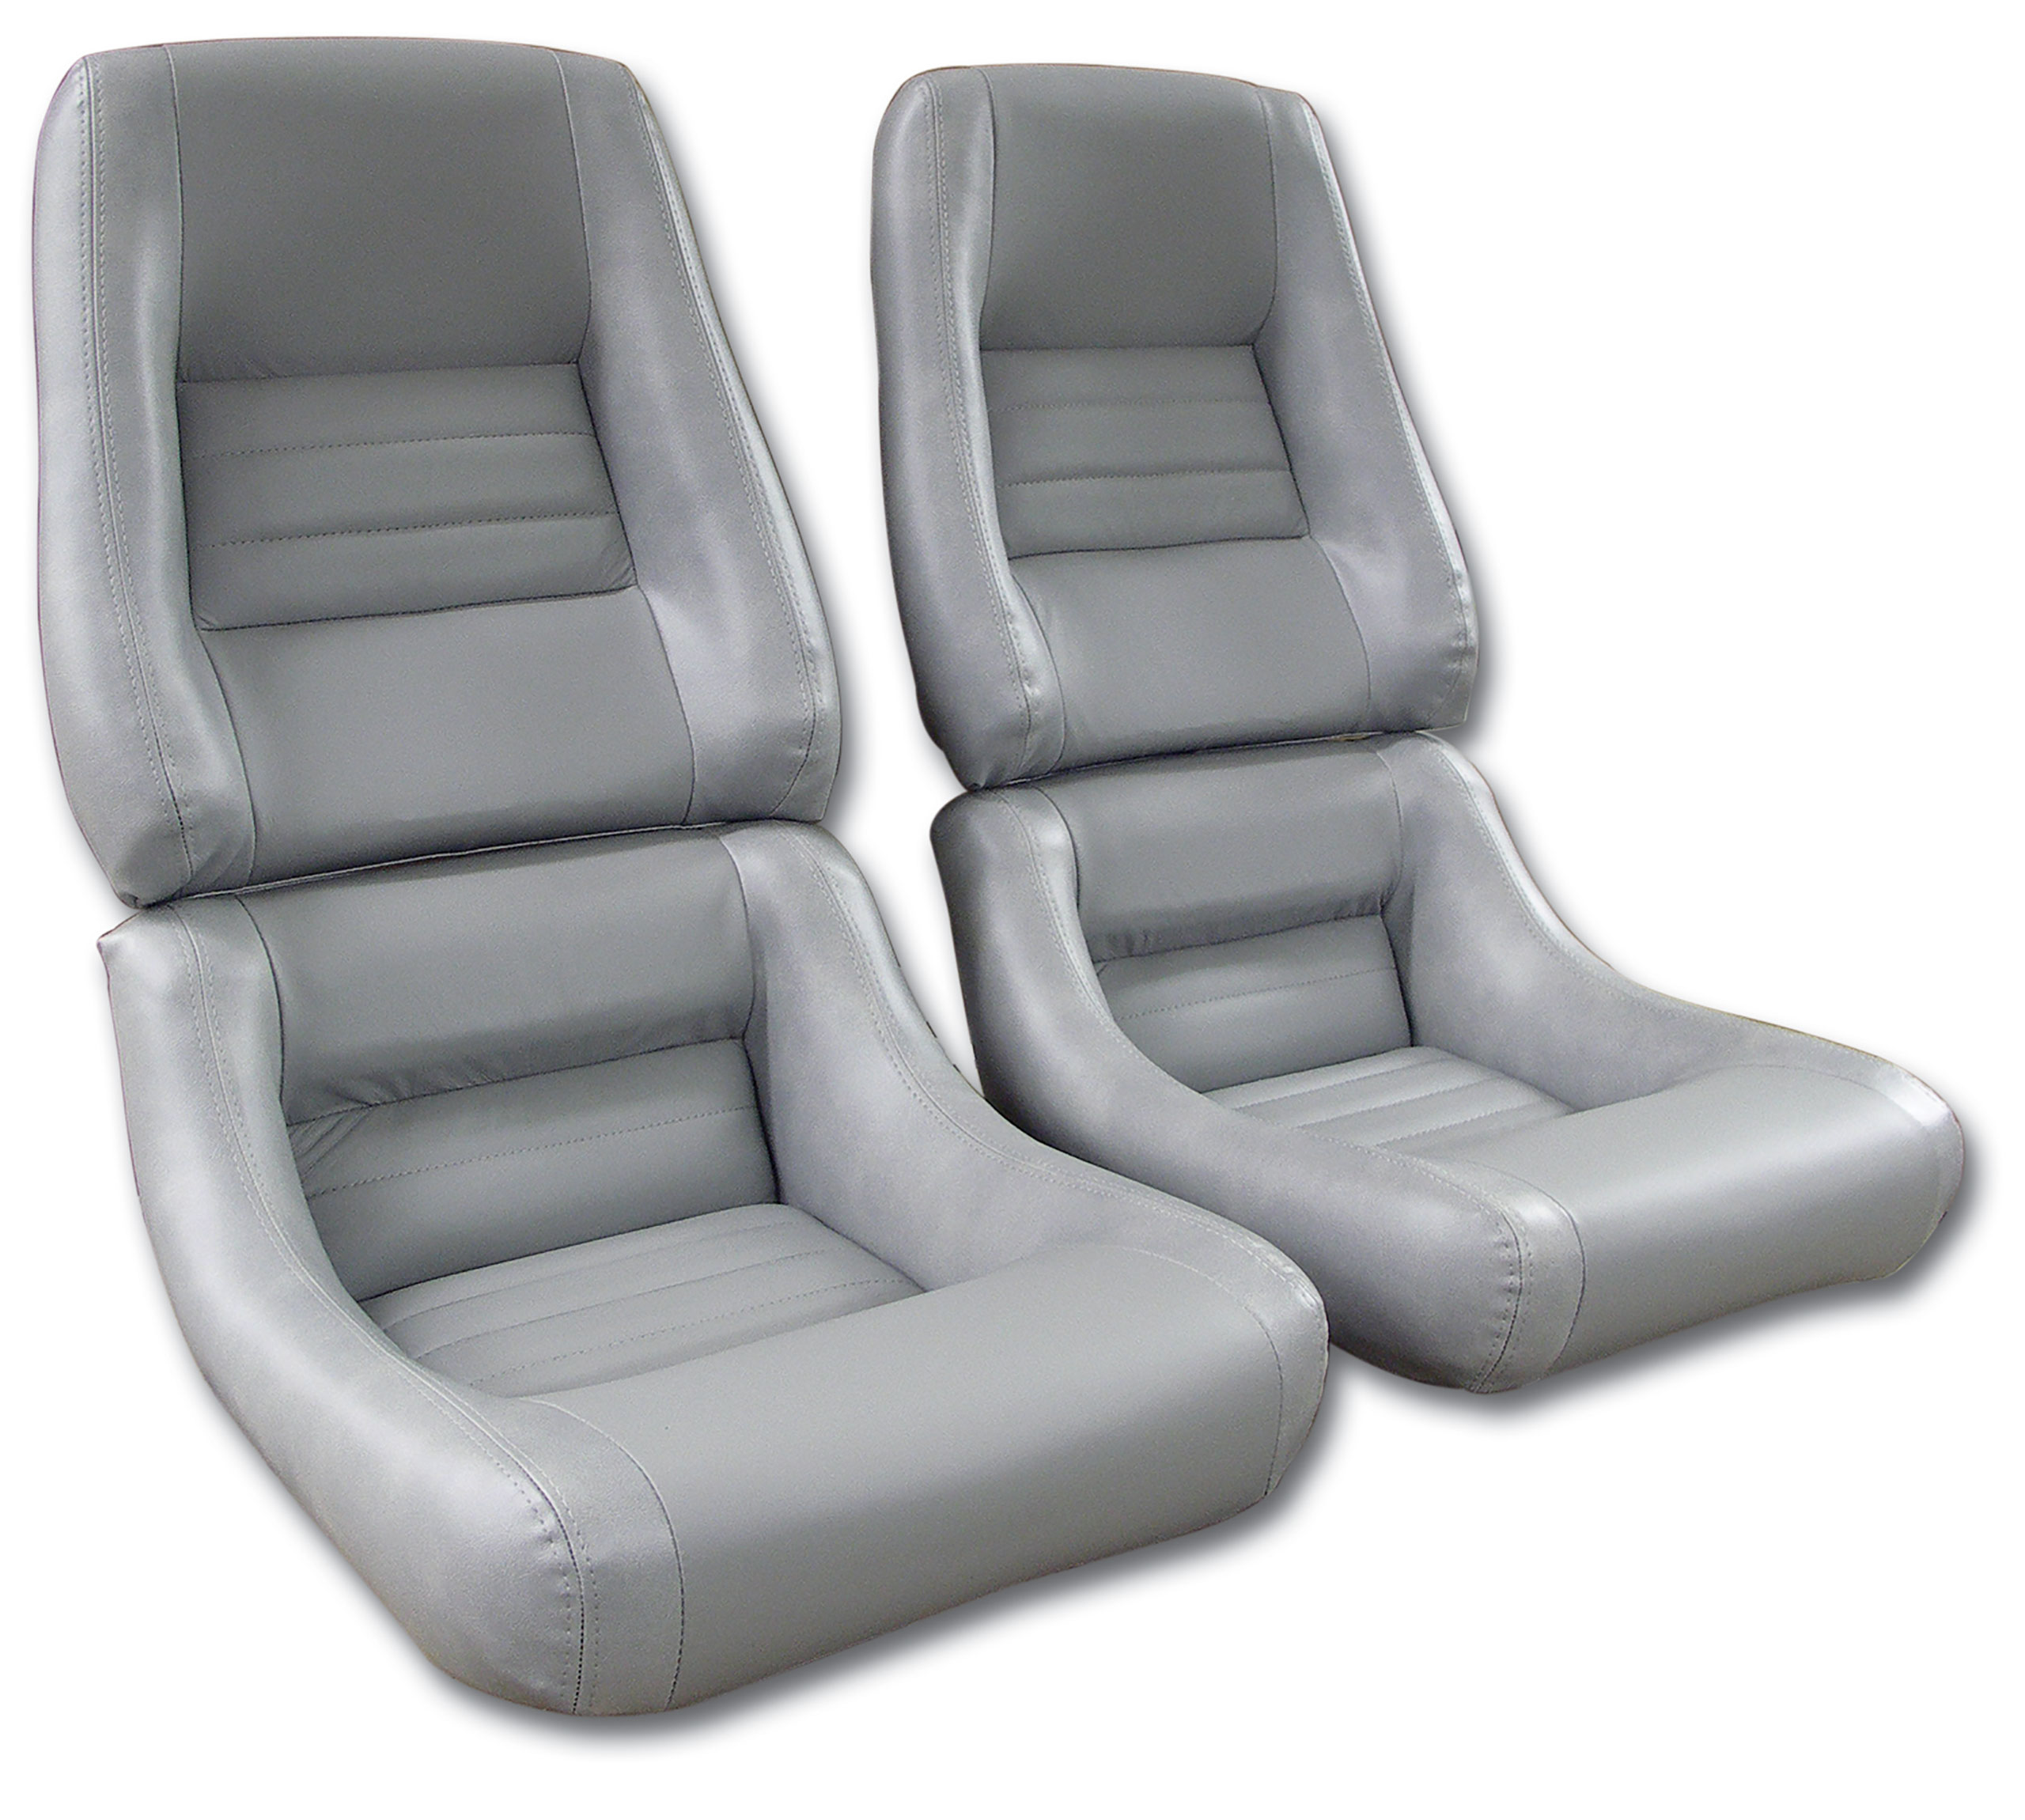 1982 Corvette C3 Mounted Leather Seat Covers Gray 4" Bolster CA-422568 